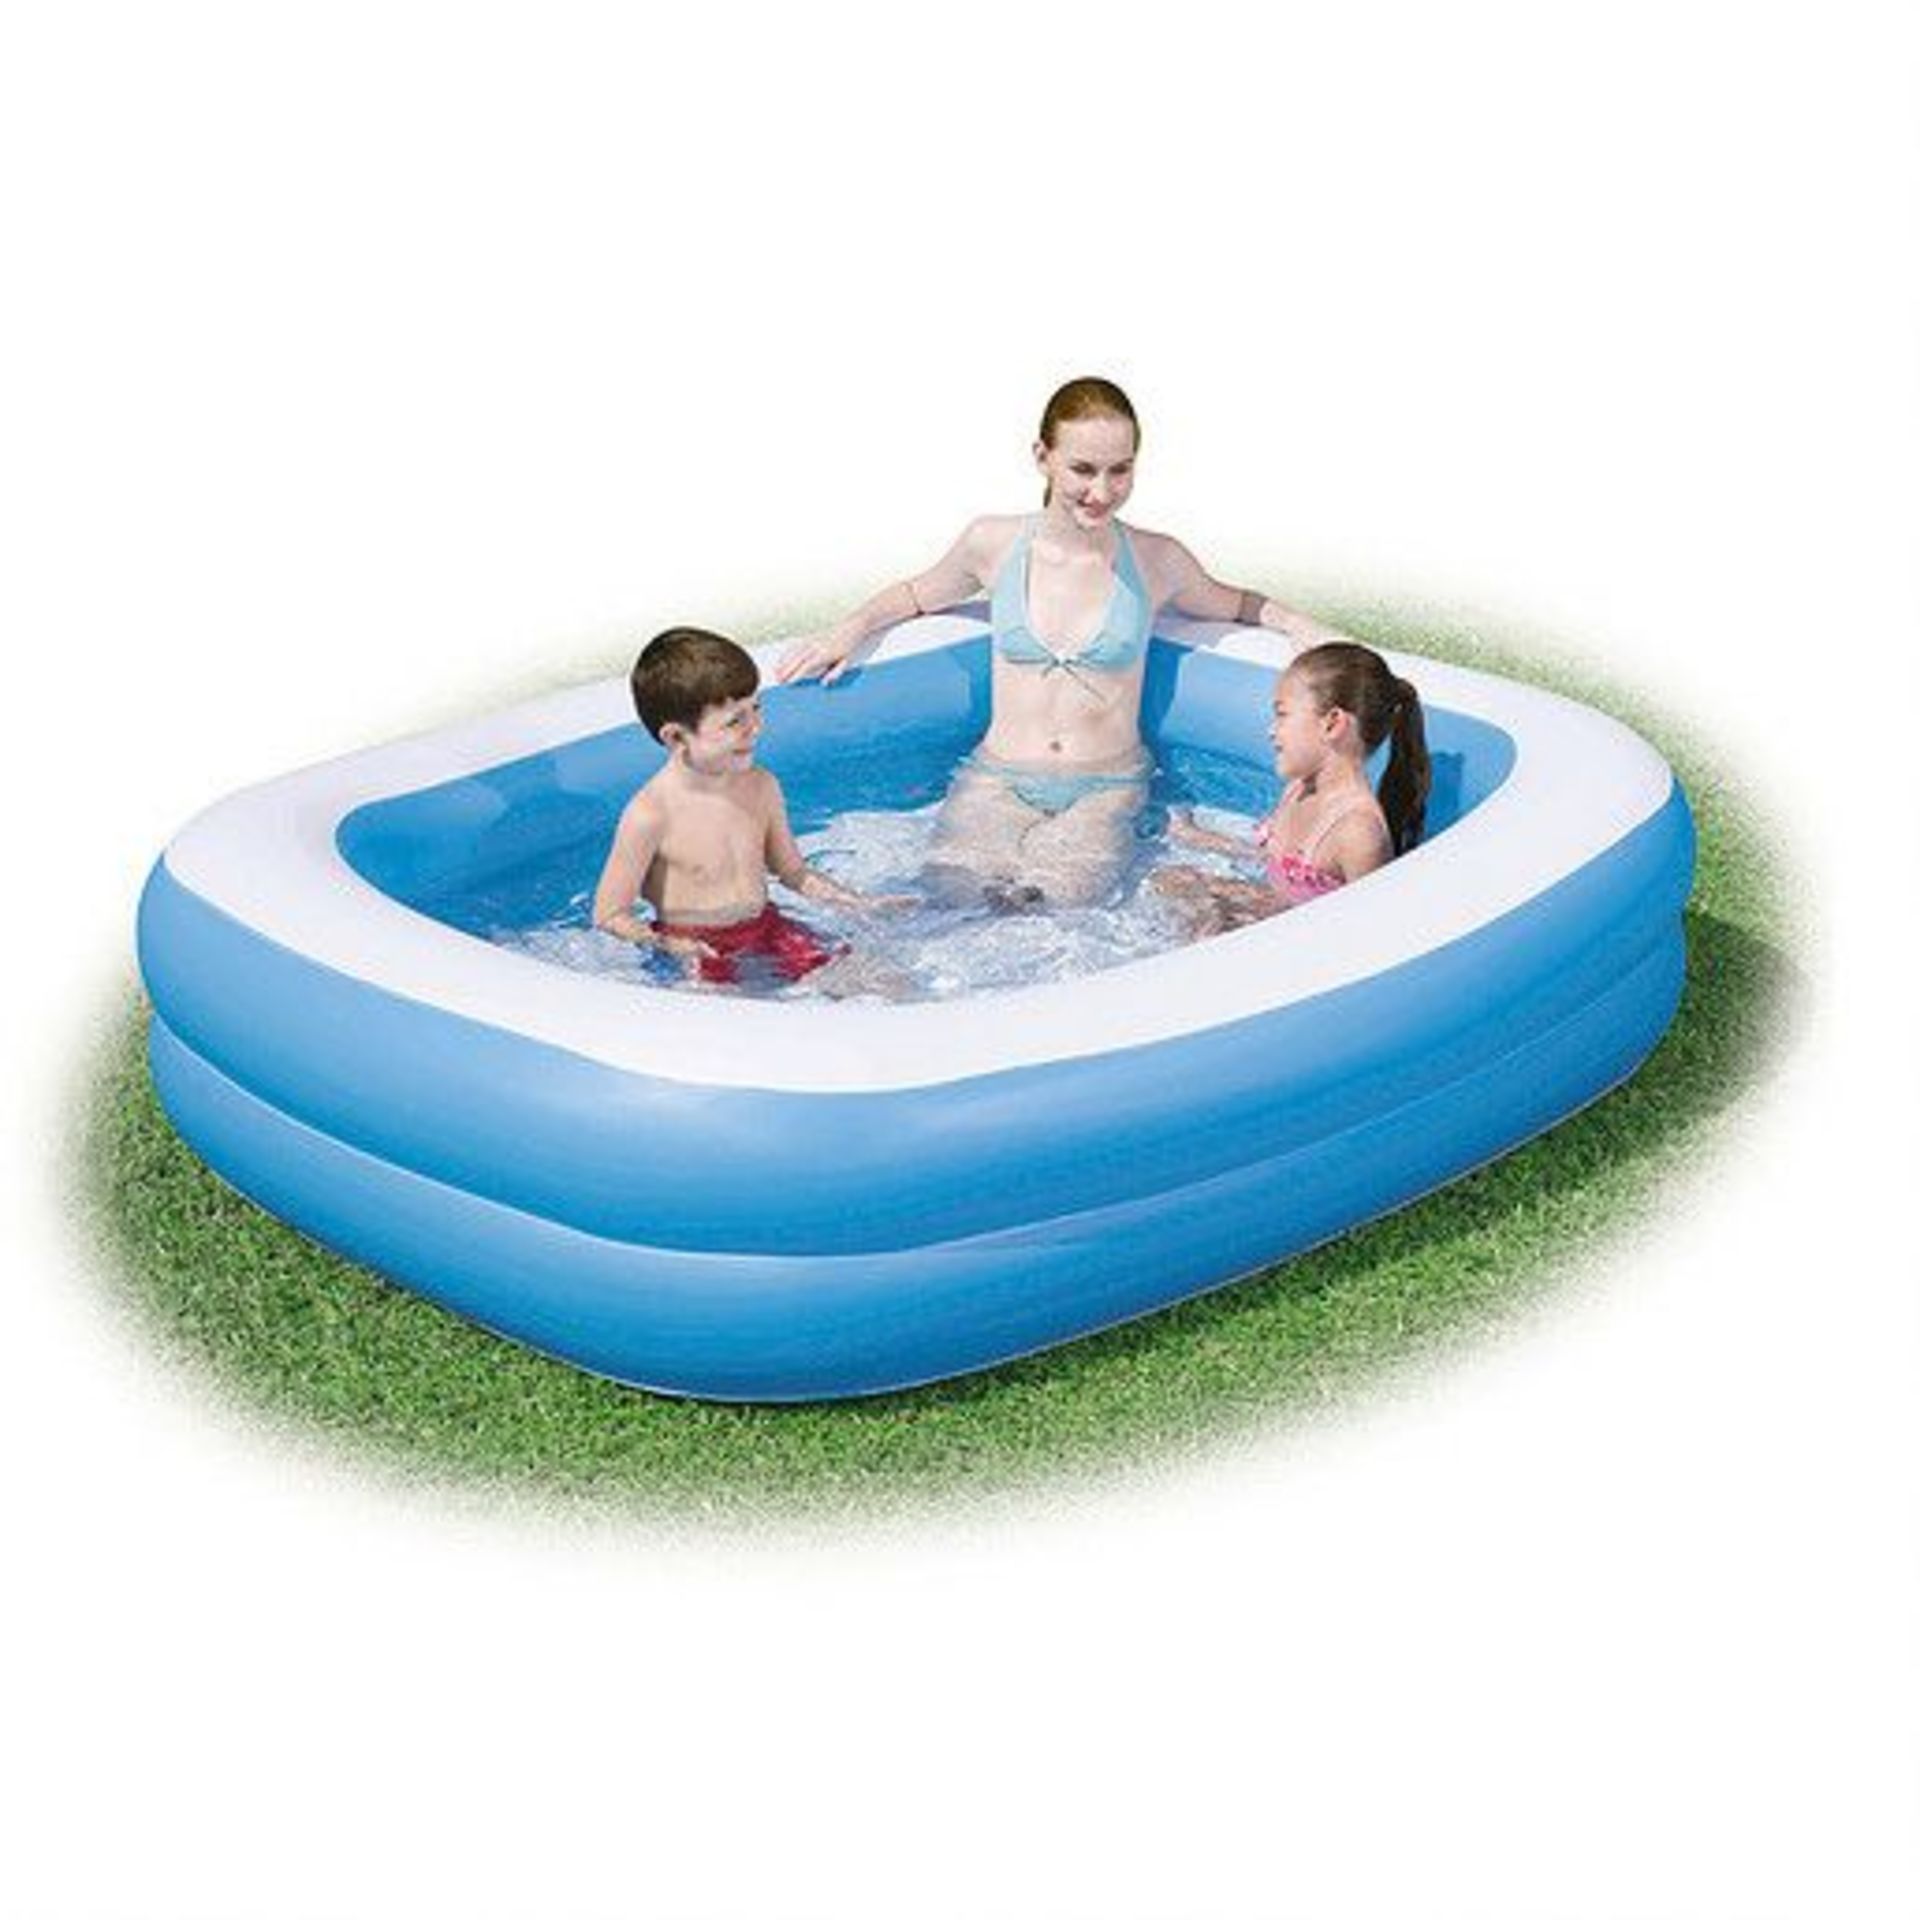 V *TRADE QTY* Brand New Large Family Blow-Up Pool (2.01m x 1.5m x 51cm) Tesco Direct Price £19.99